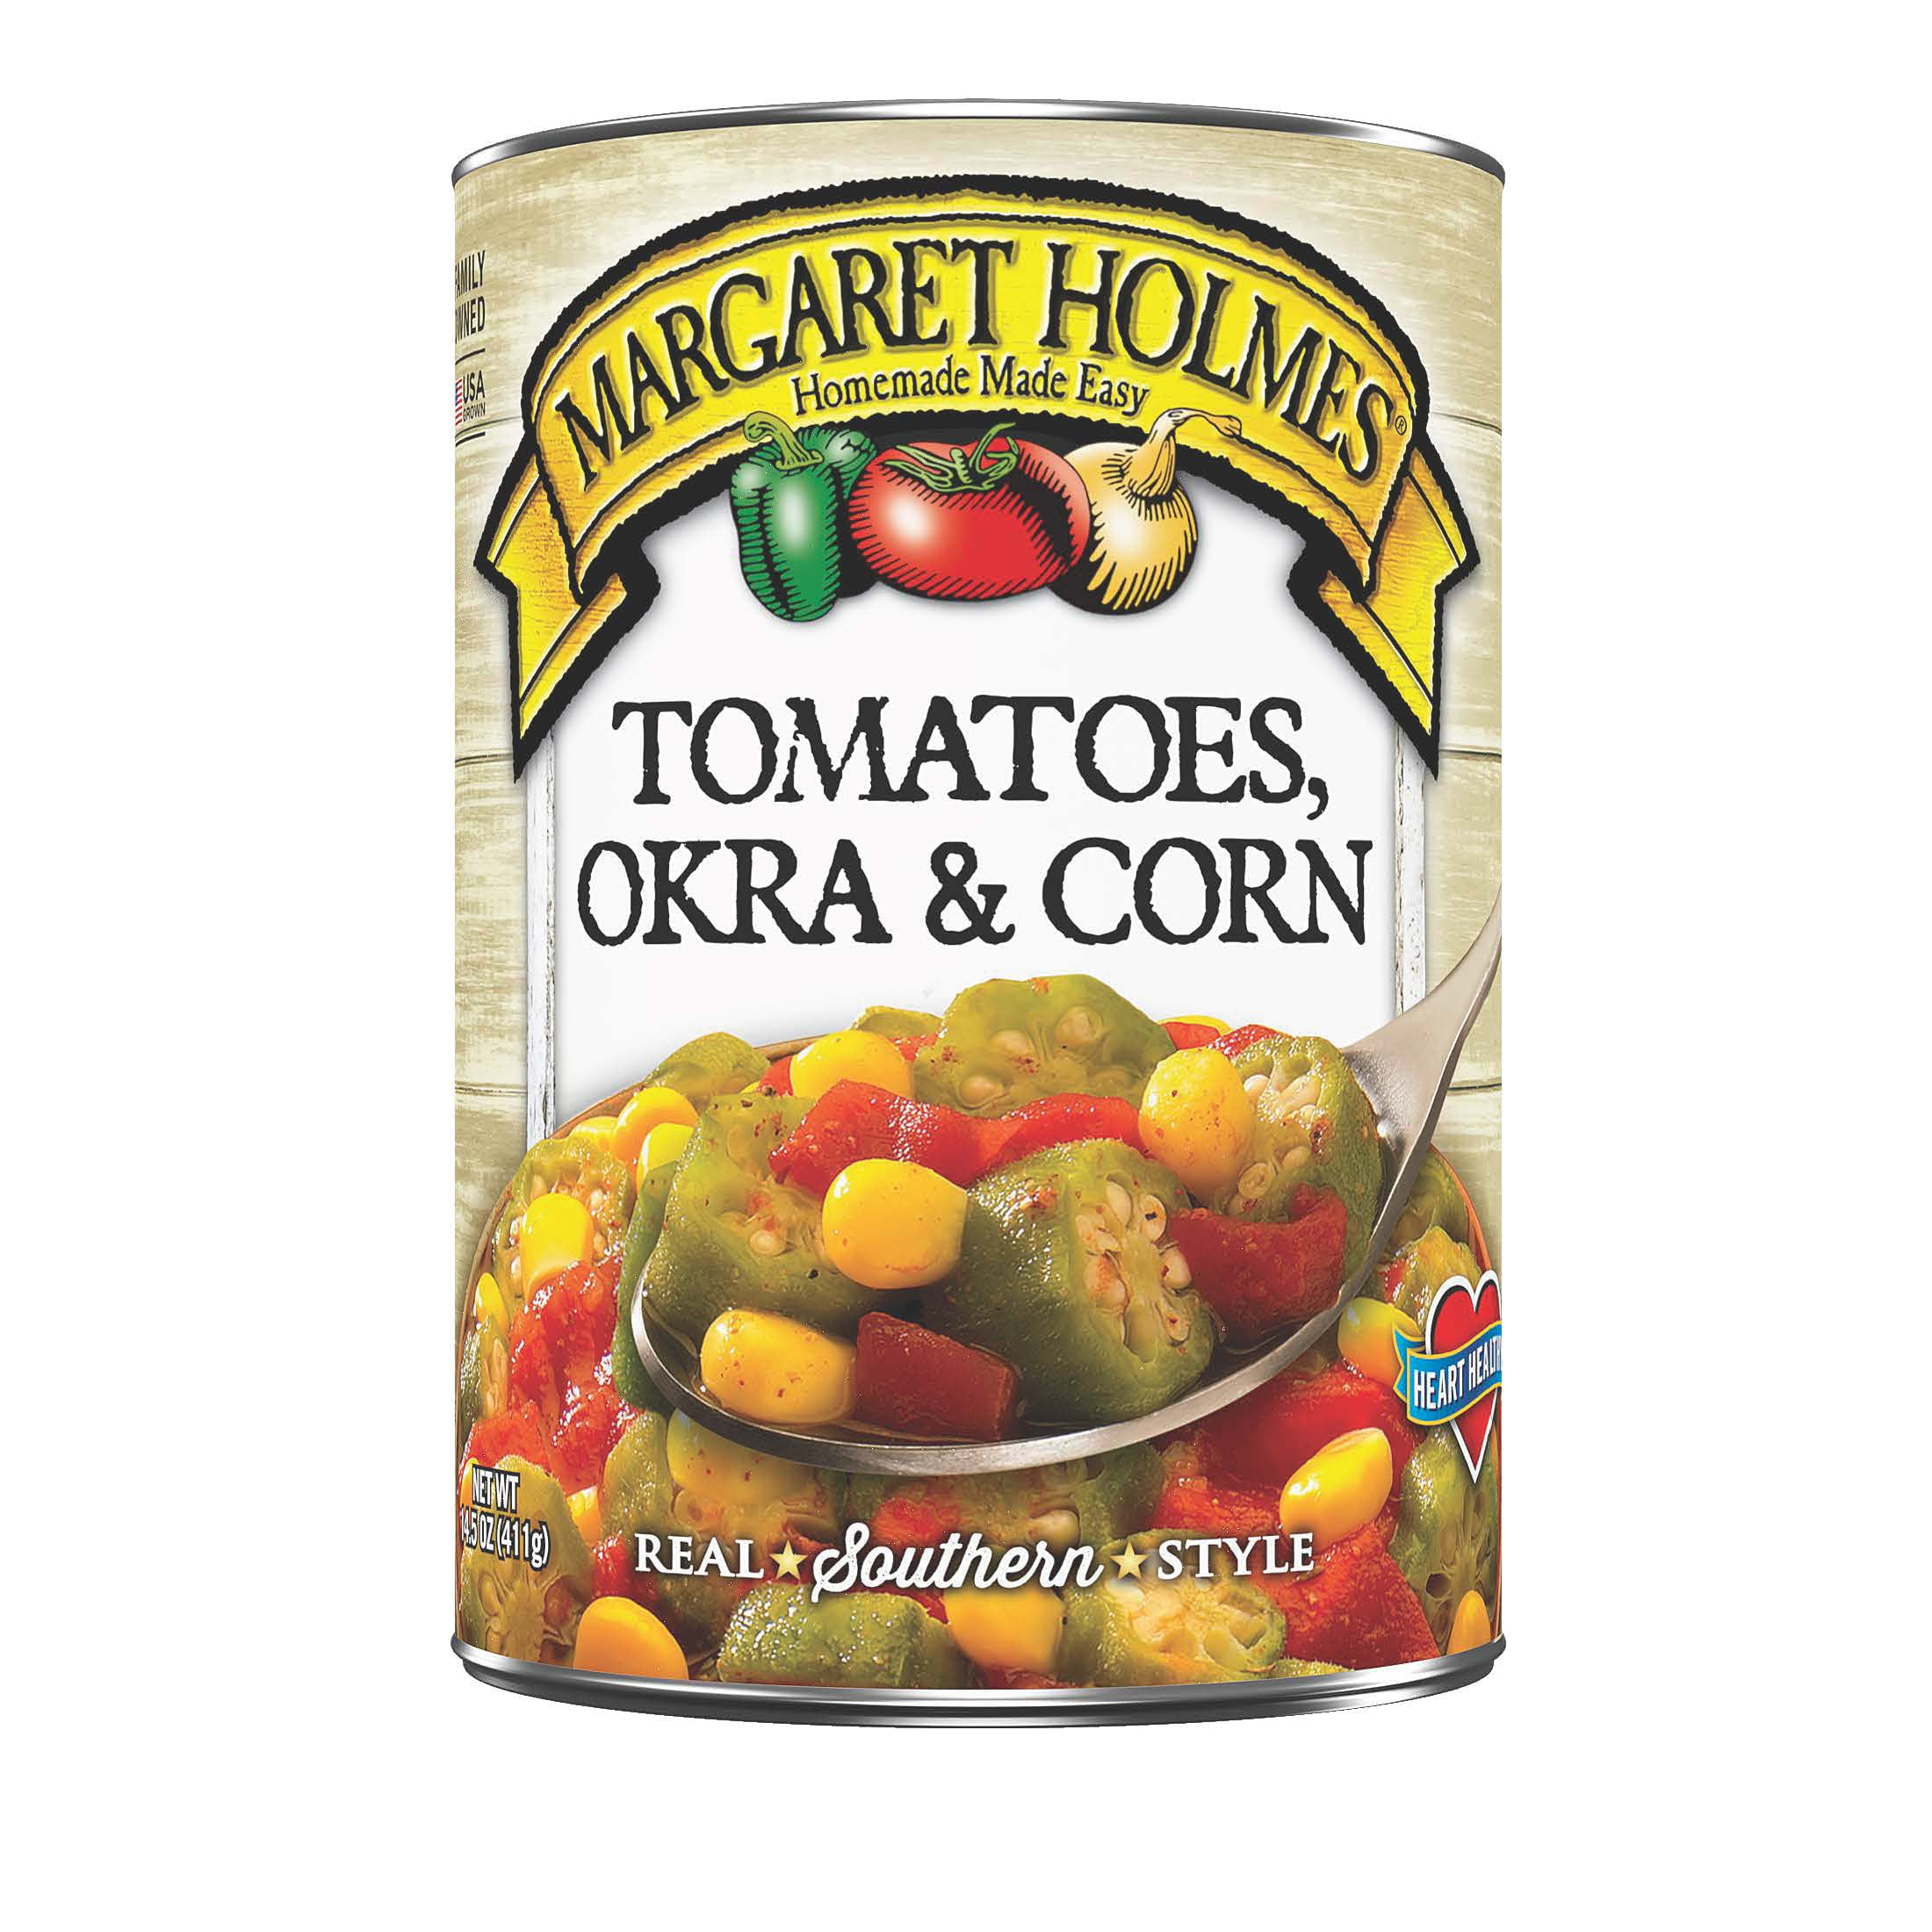 Margaret Holmes Canned Tomatoes, Okra and Corn, 14.5 oz